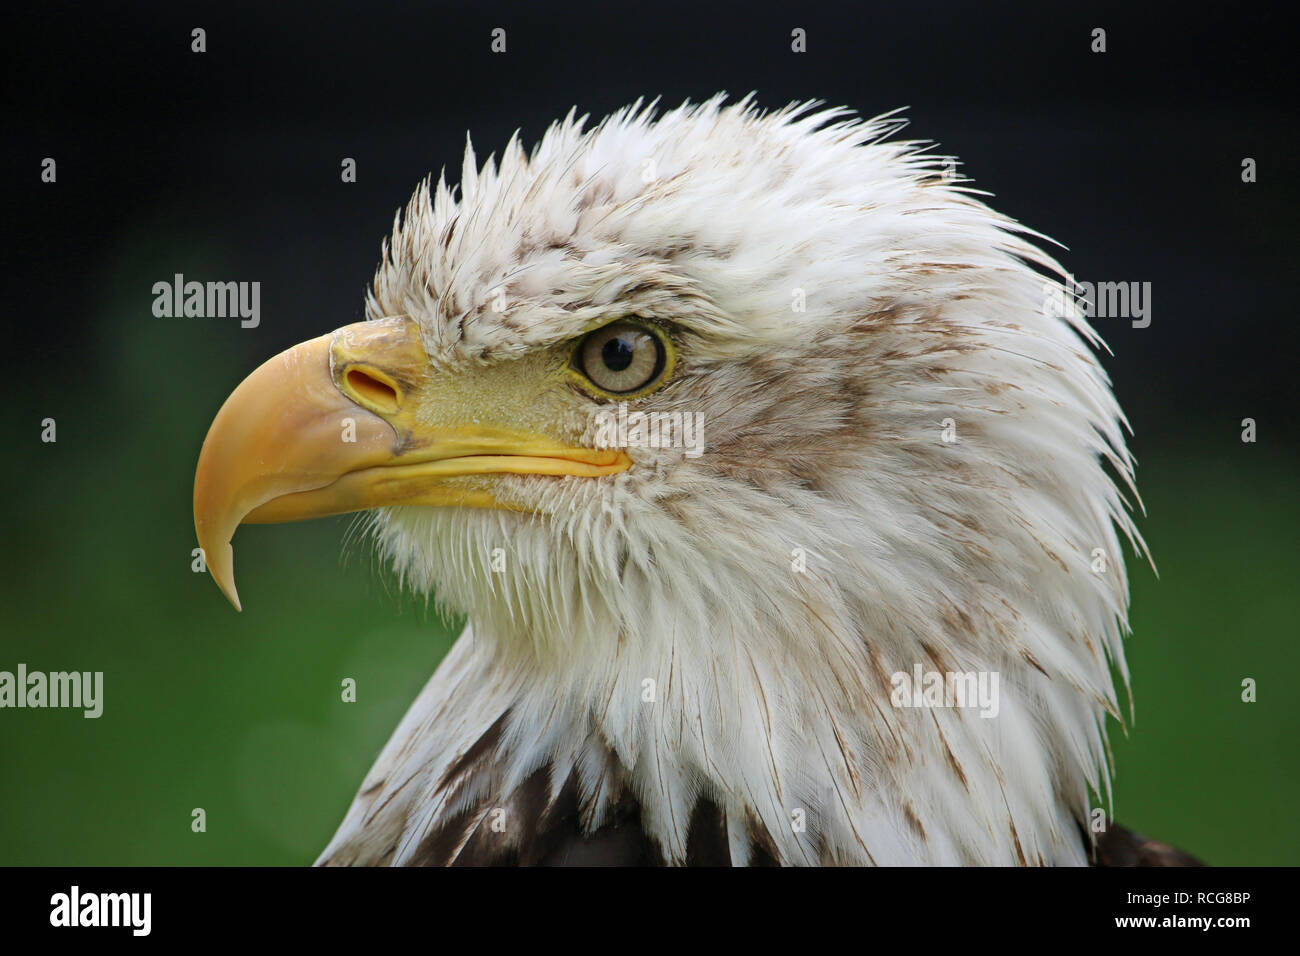 Head and shoulders of a sub-adult American bald eagle (Haliaeetus leucocephalus) facing left with a green and black blurred background. Stock Photo